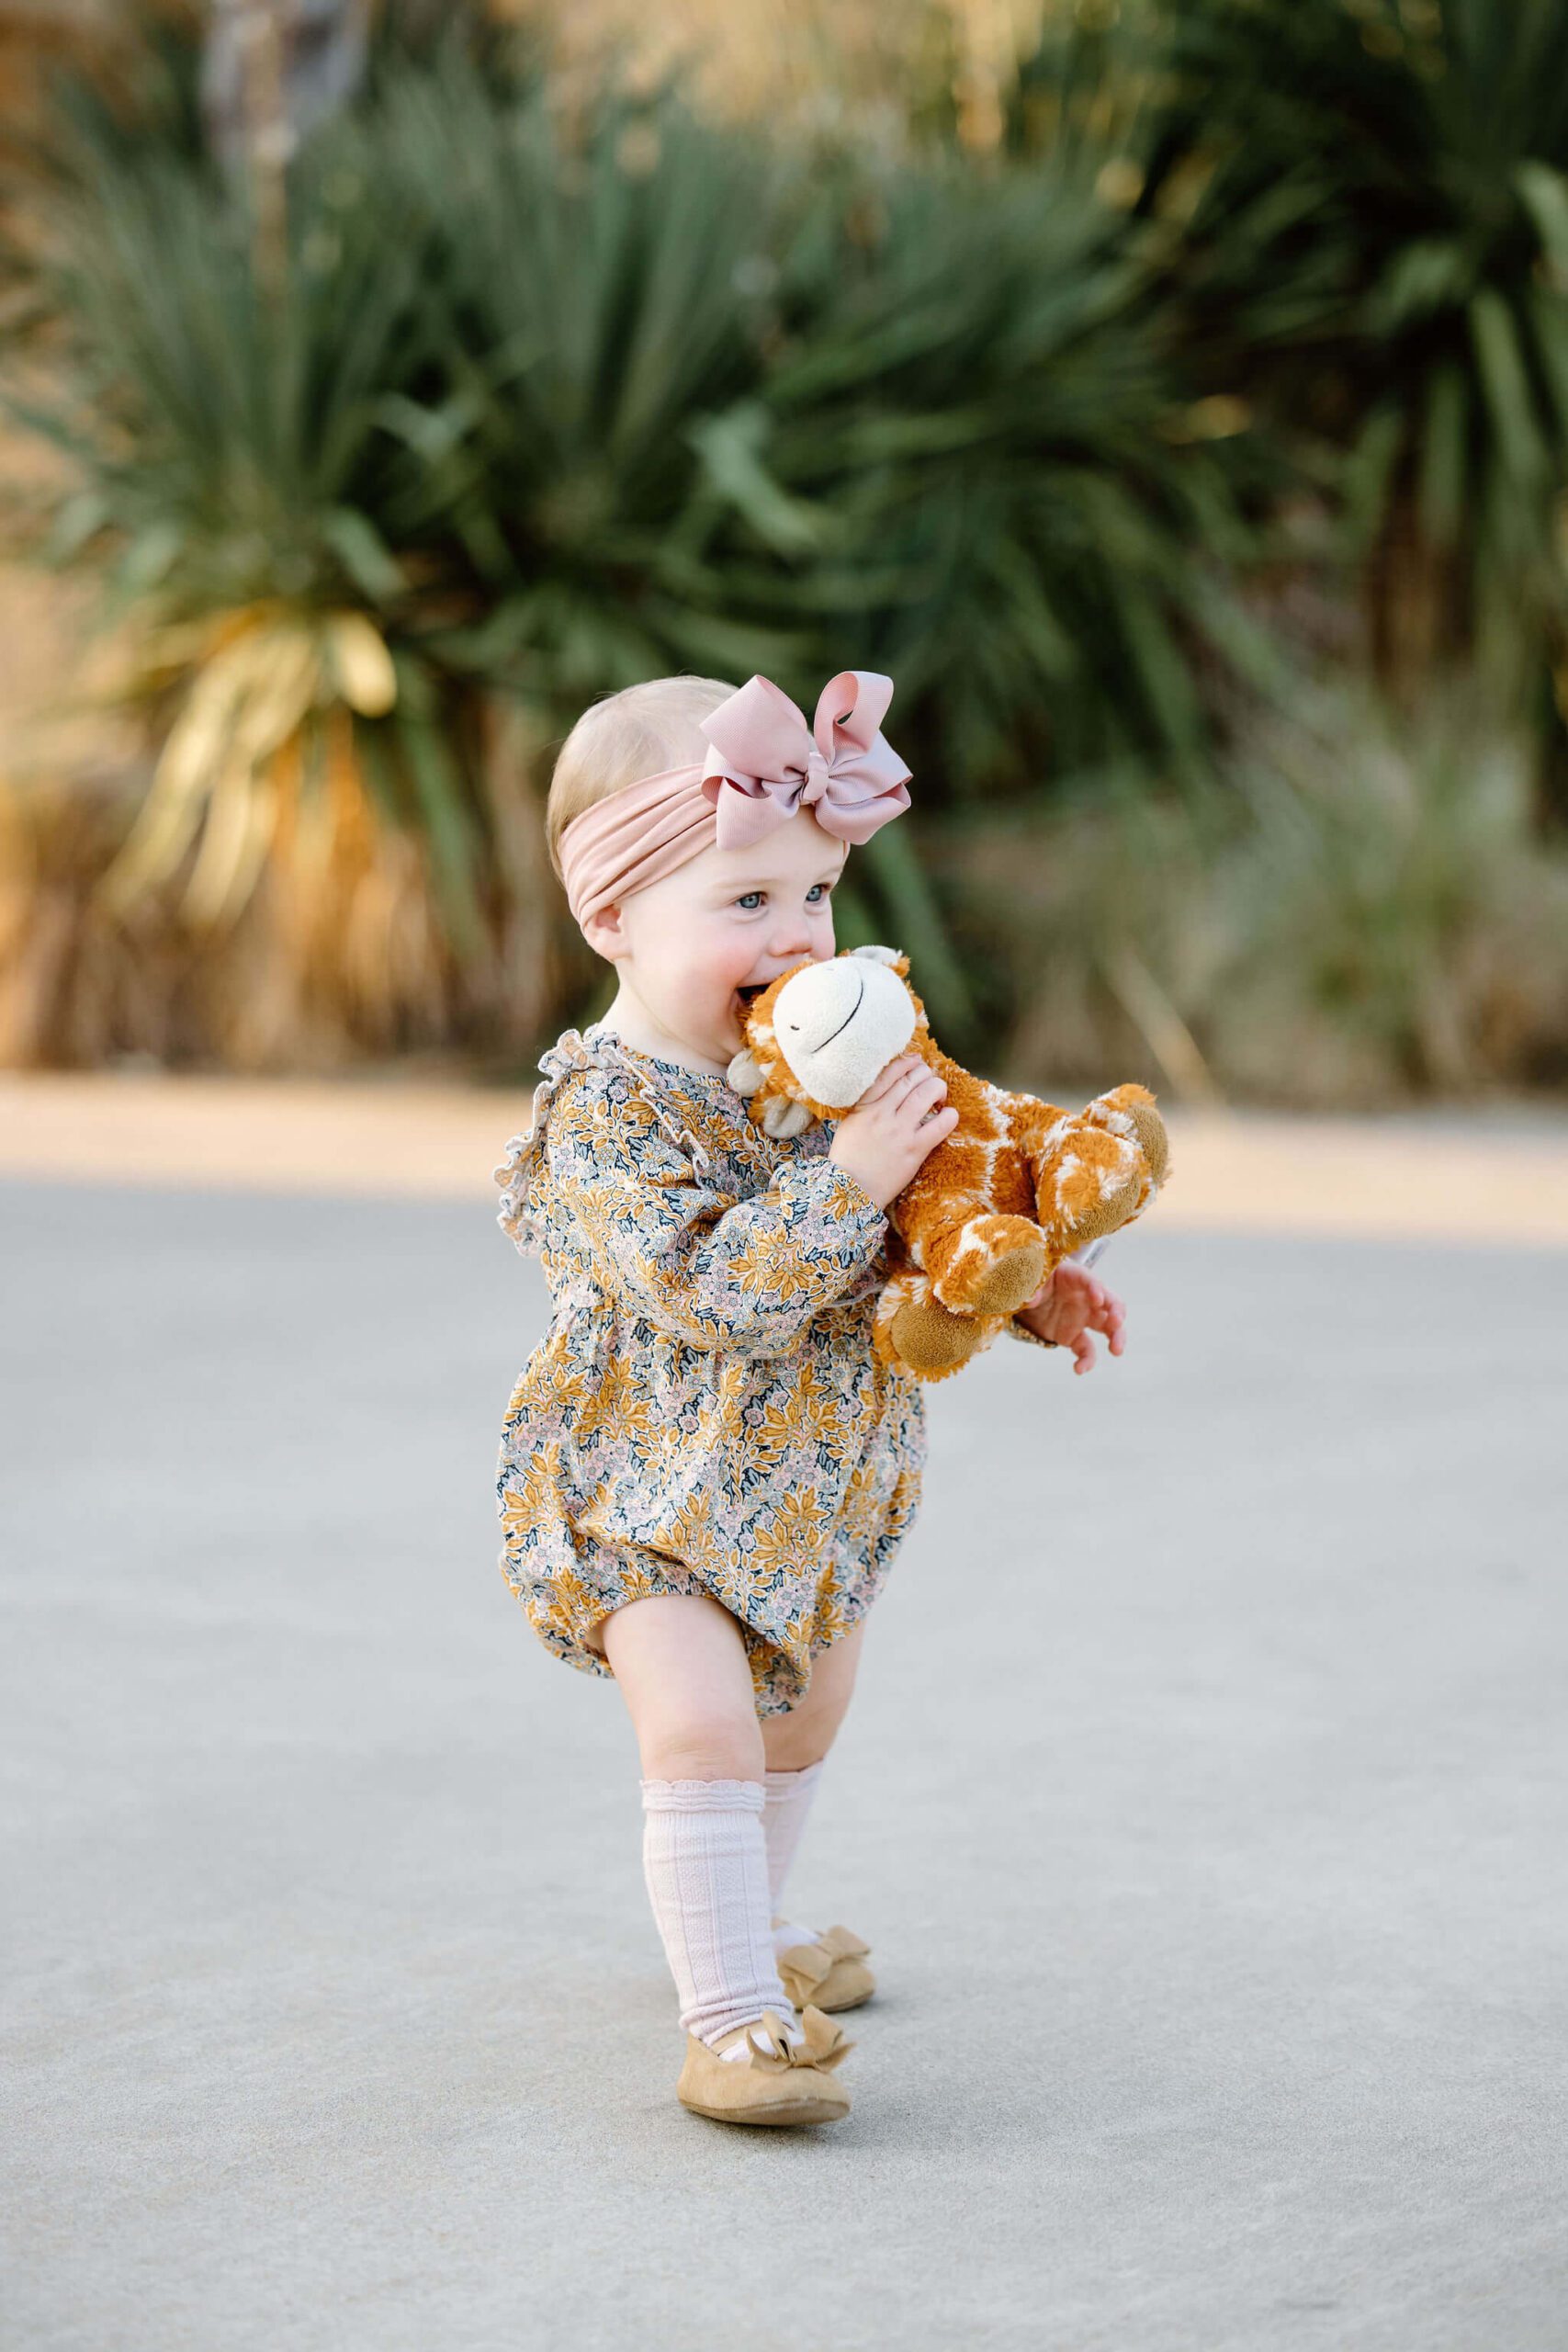 candid baby picture of 1 year old girl in fall colored romper and matching bow holding favorite stuffed animal